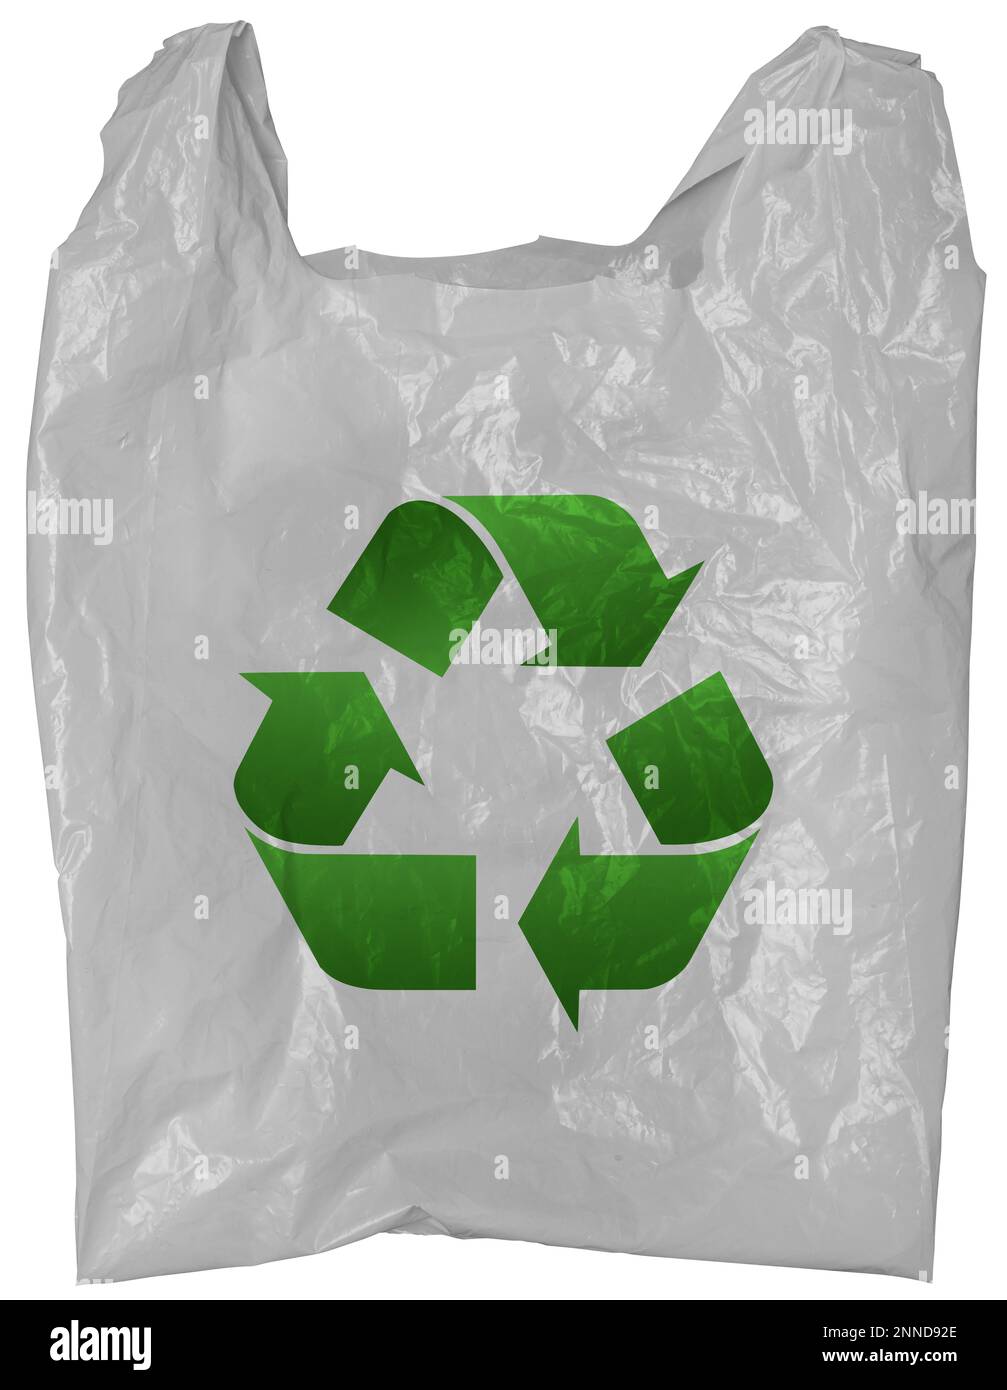 Recycling plastic bags Stock Photos, Royalty Free Recycling